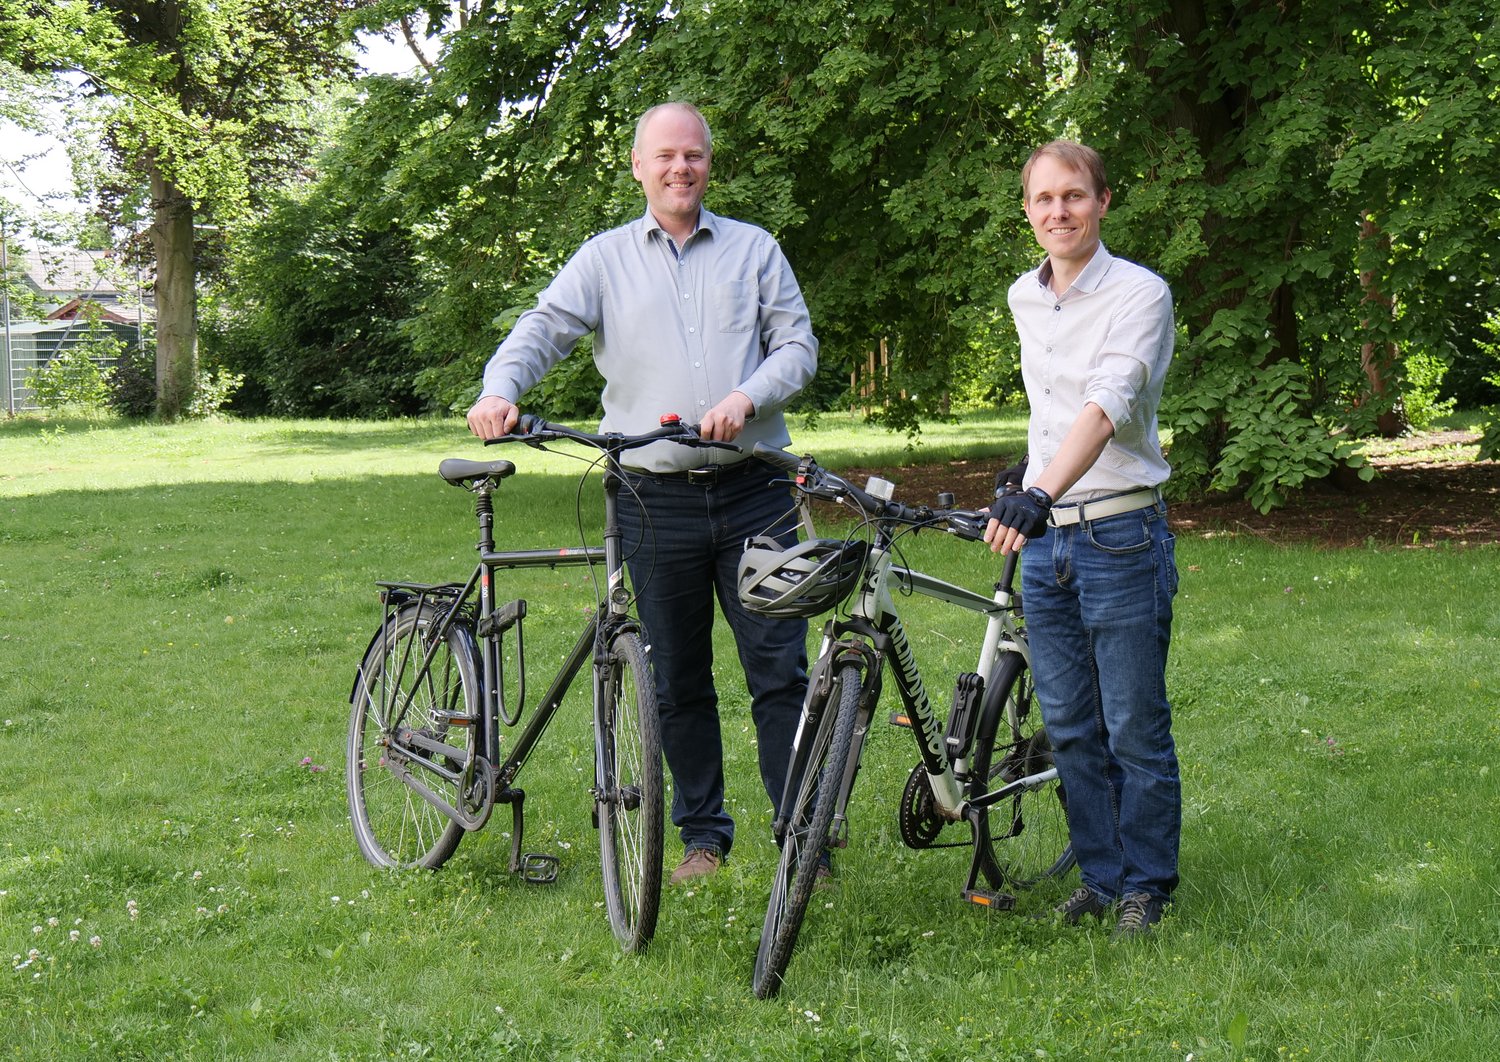 Bernhard Auinger and Herbert Hackl with their bikes